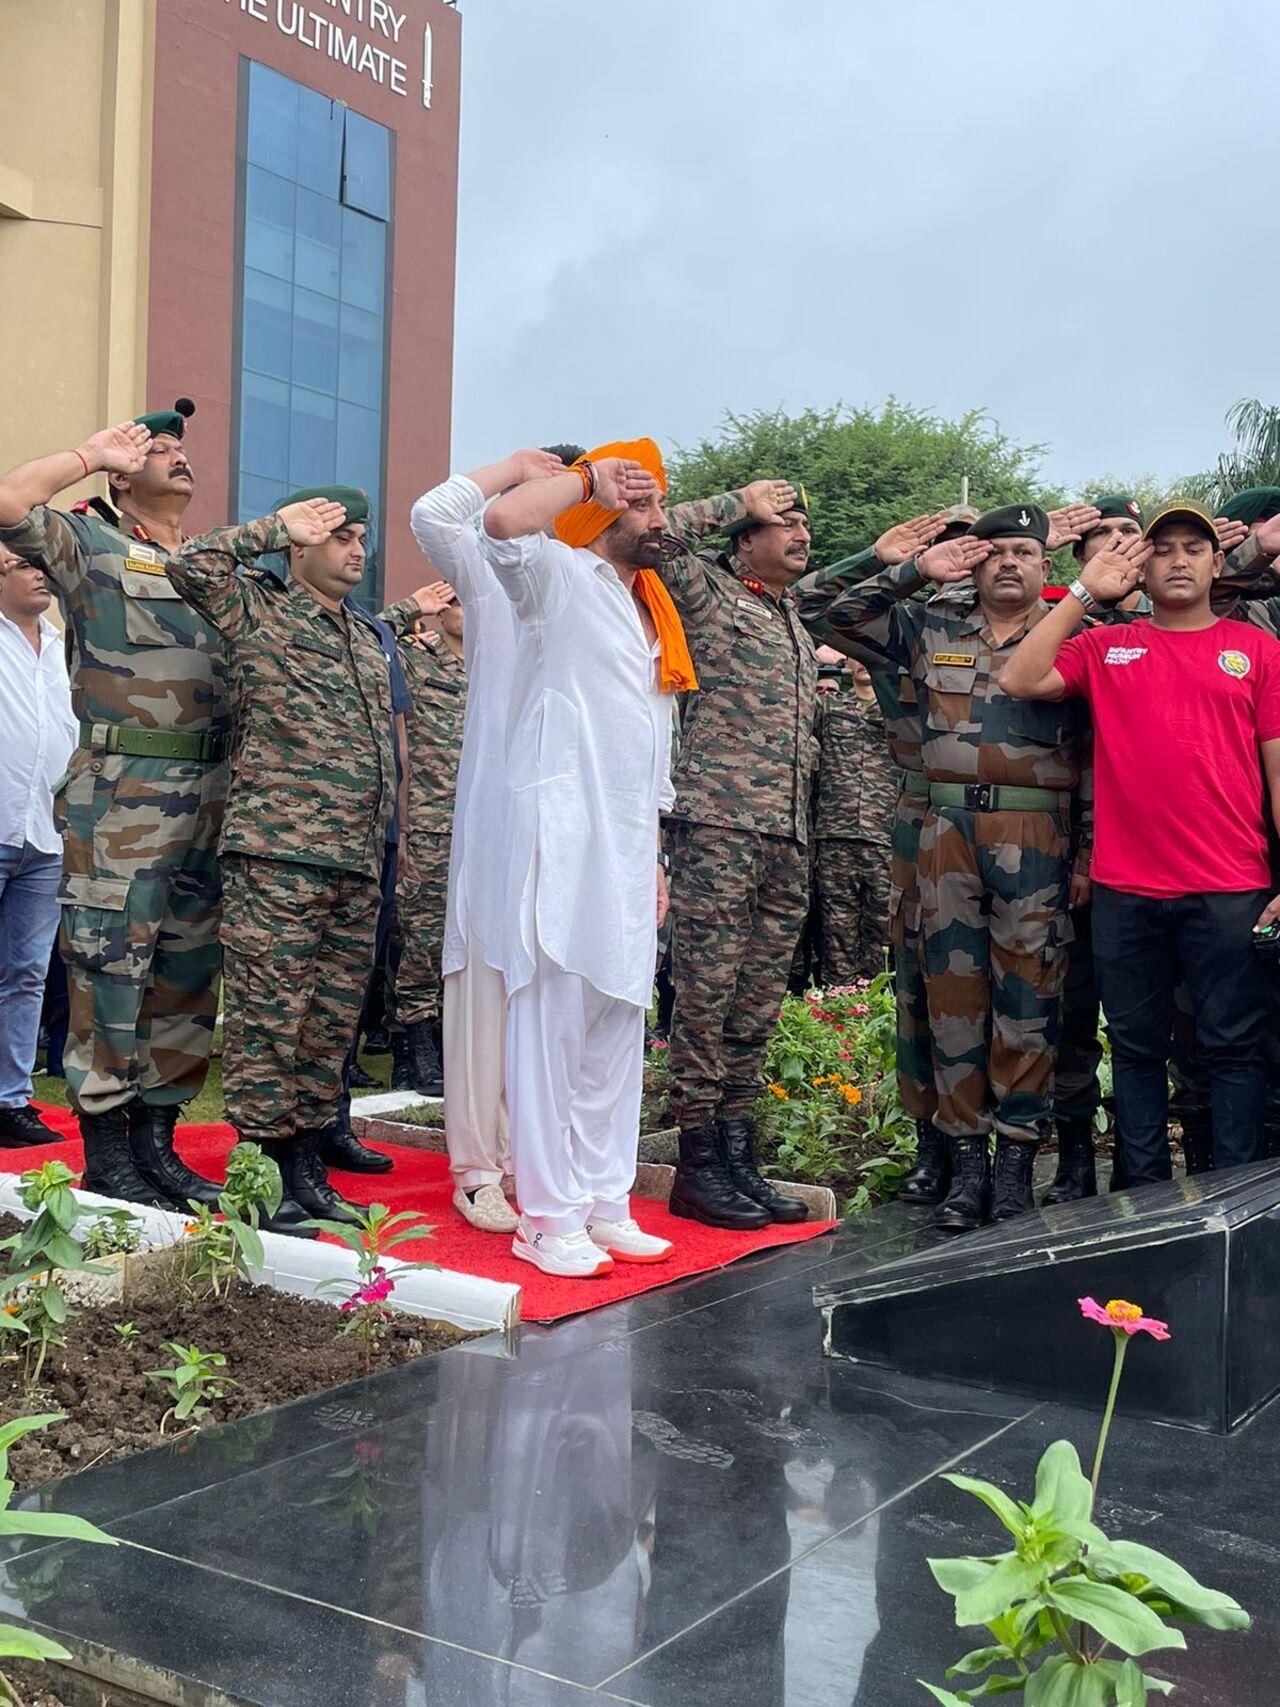 Actor Sunny Deol who is basking in the massive success of his patriotic film 'Gadar 2' celebrated the day with the Indian army at Mhow